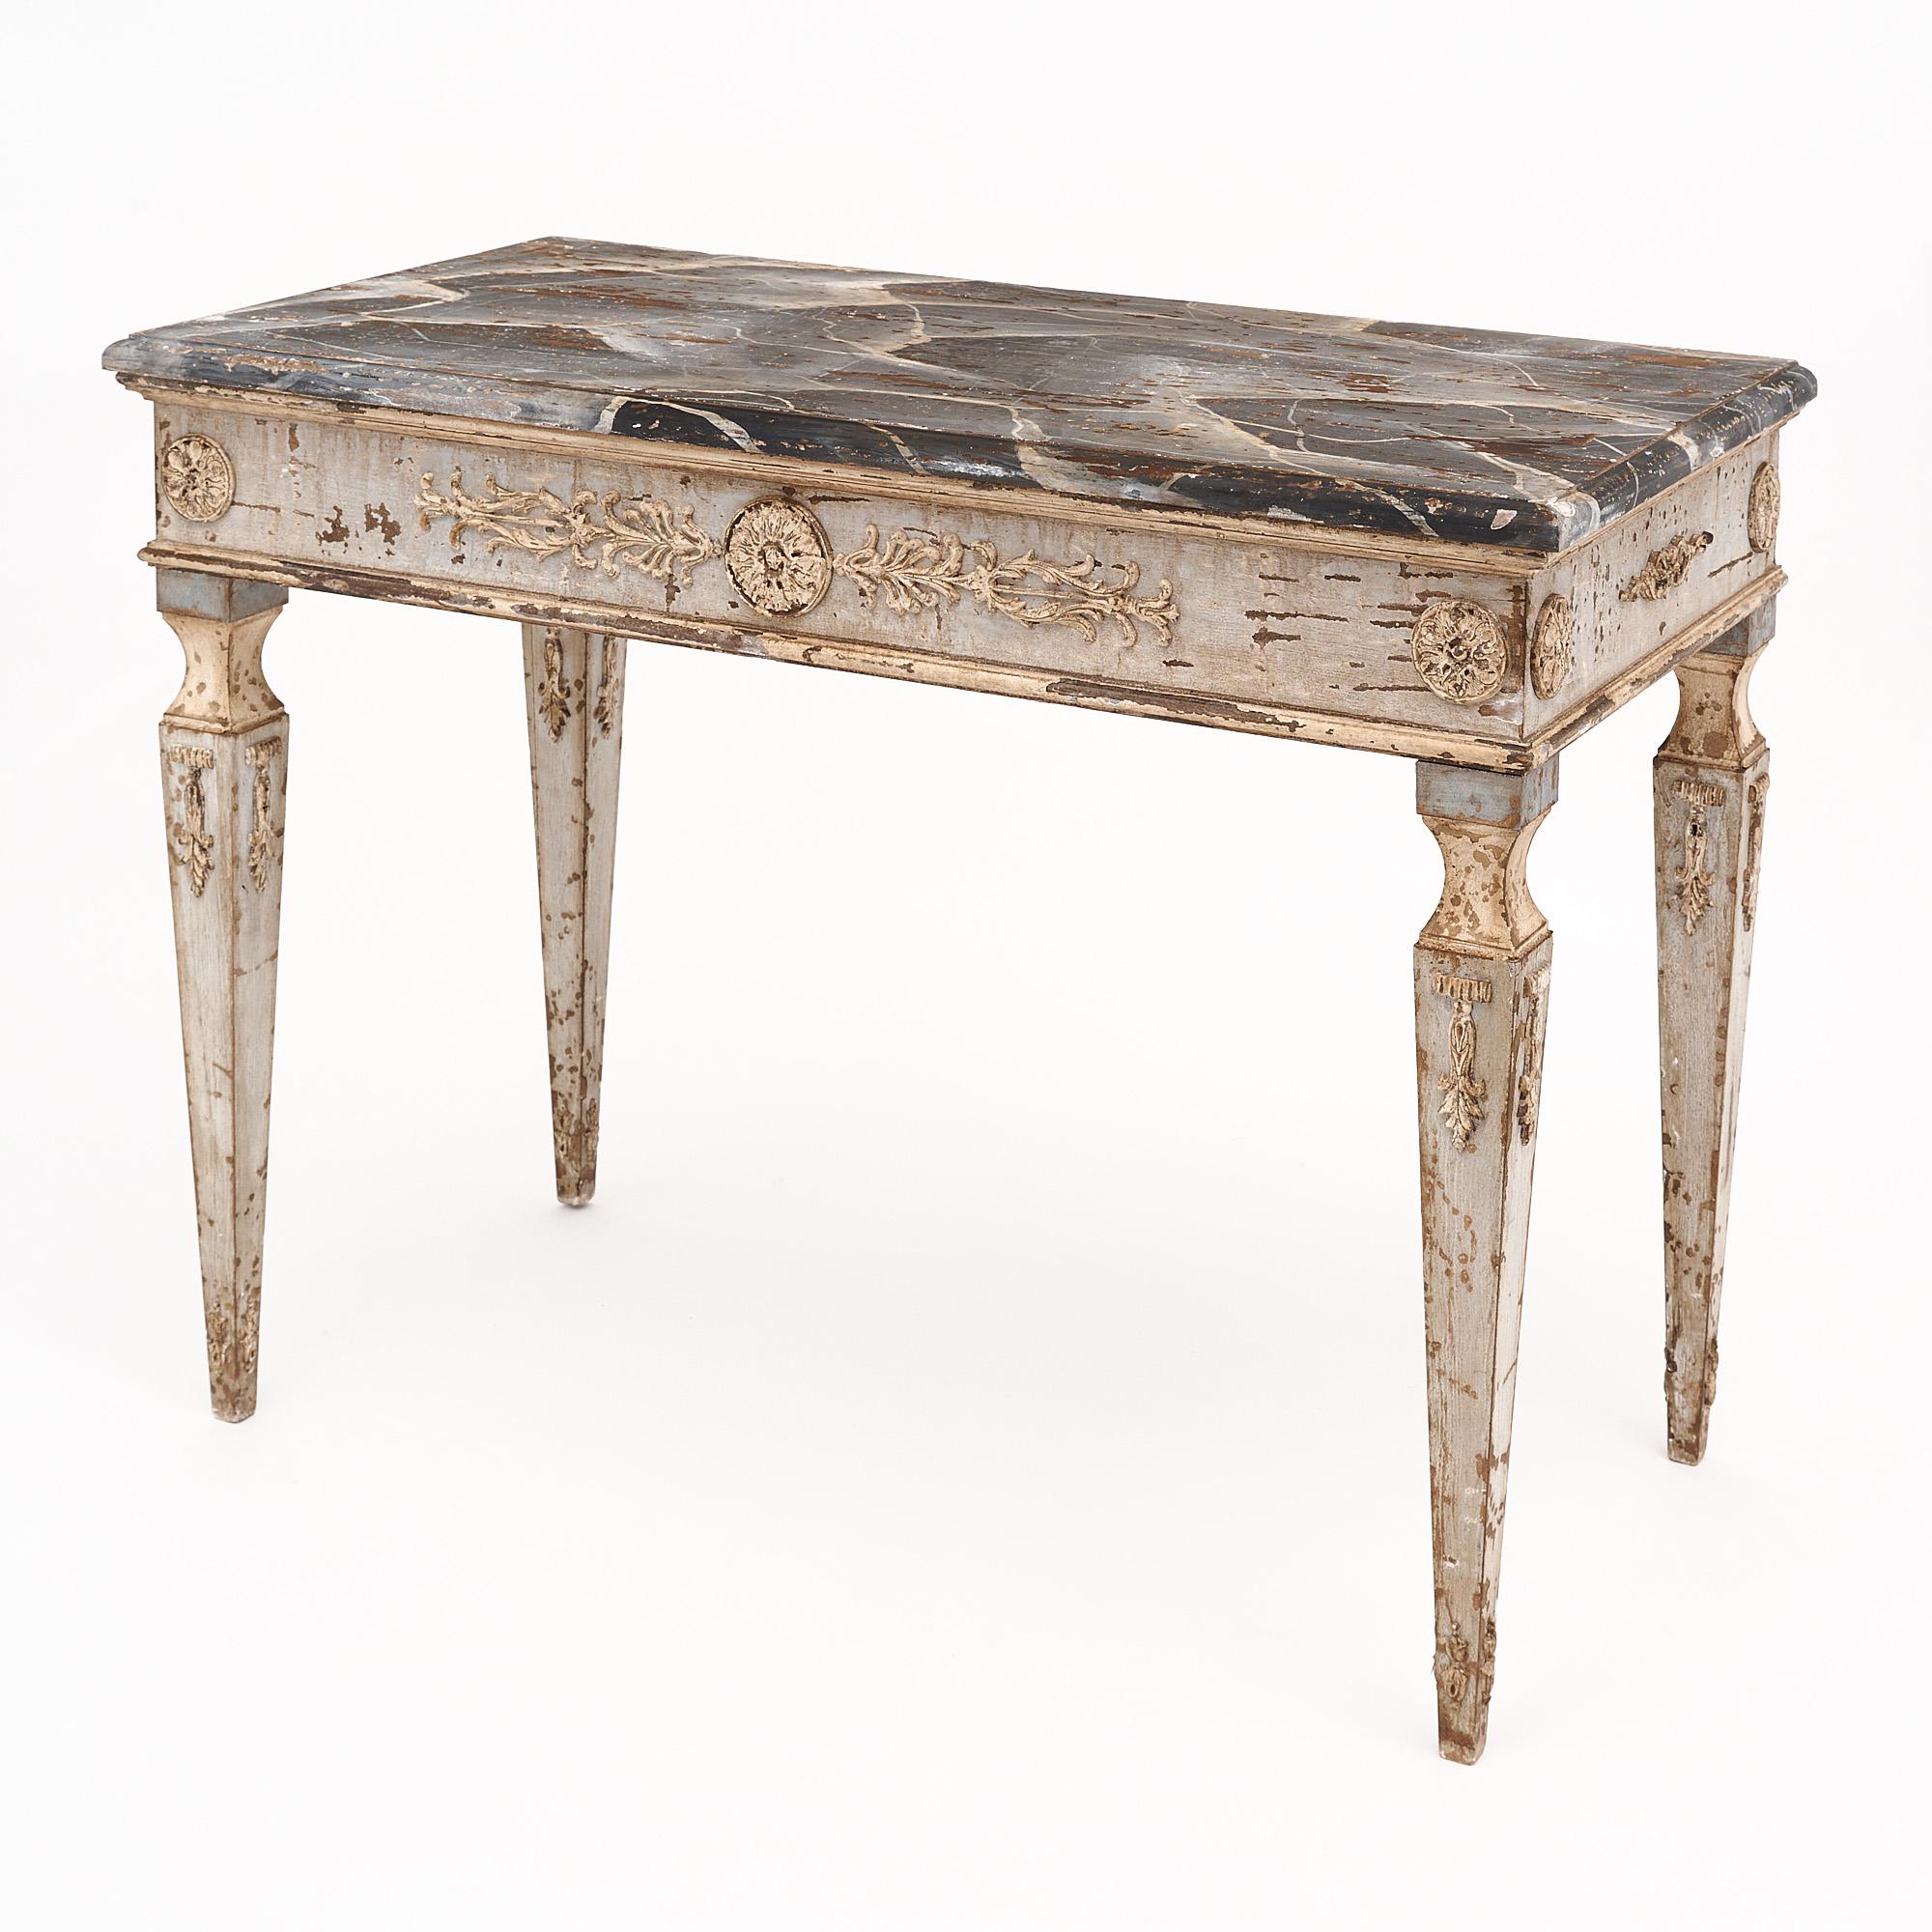 Pair of consoles from Italy featuring hand-carved floral friezes and tapered legs. The bases of the tables have a soft Trianon gray color. The tops are hand-painted with a faux marble finish.
